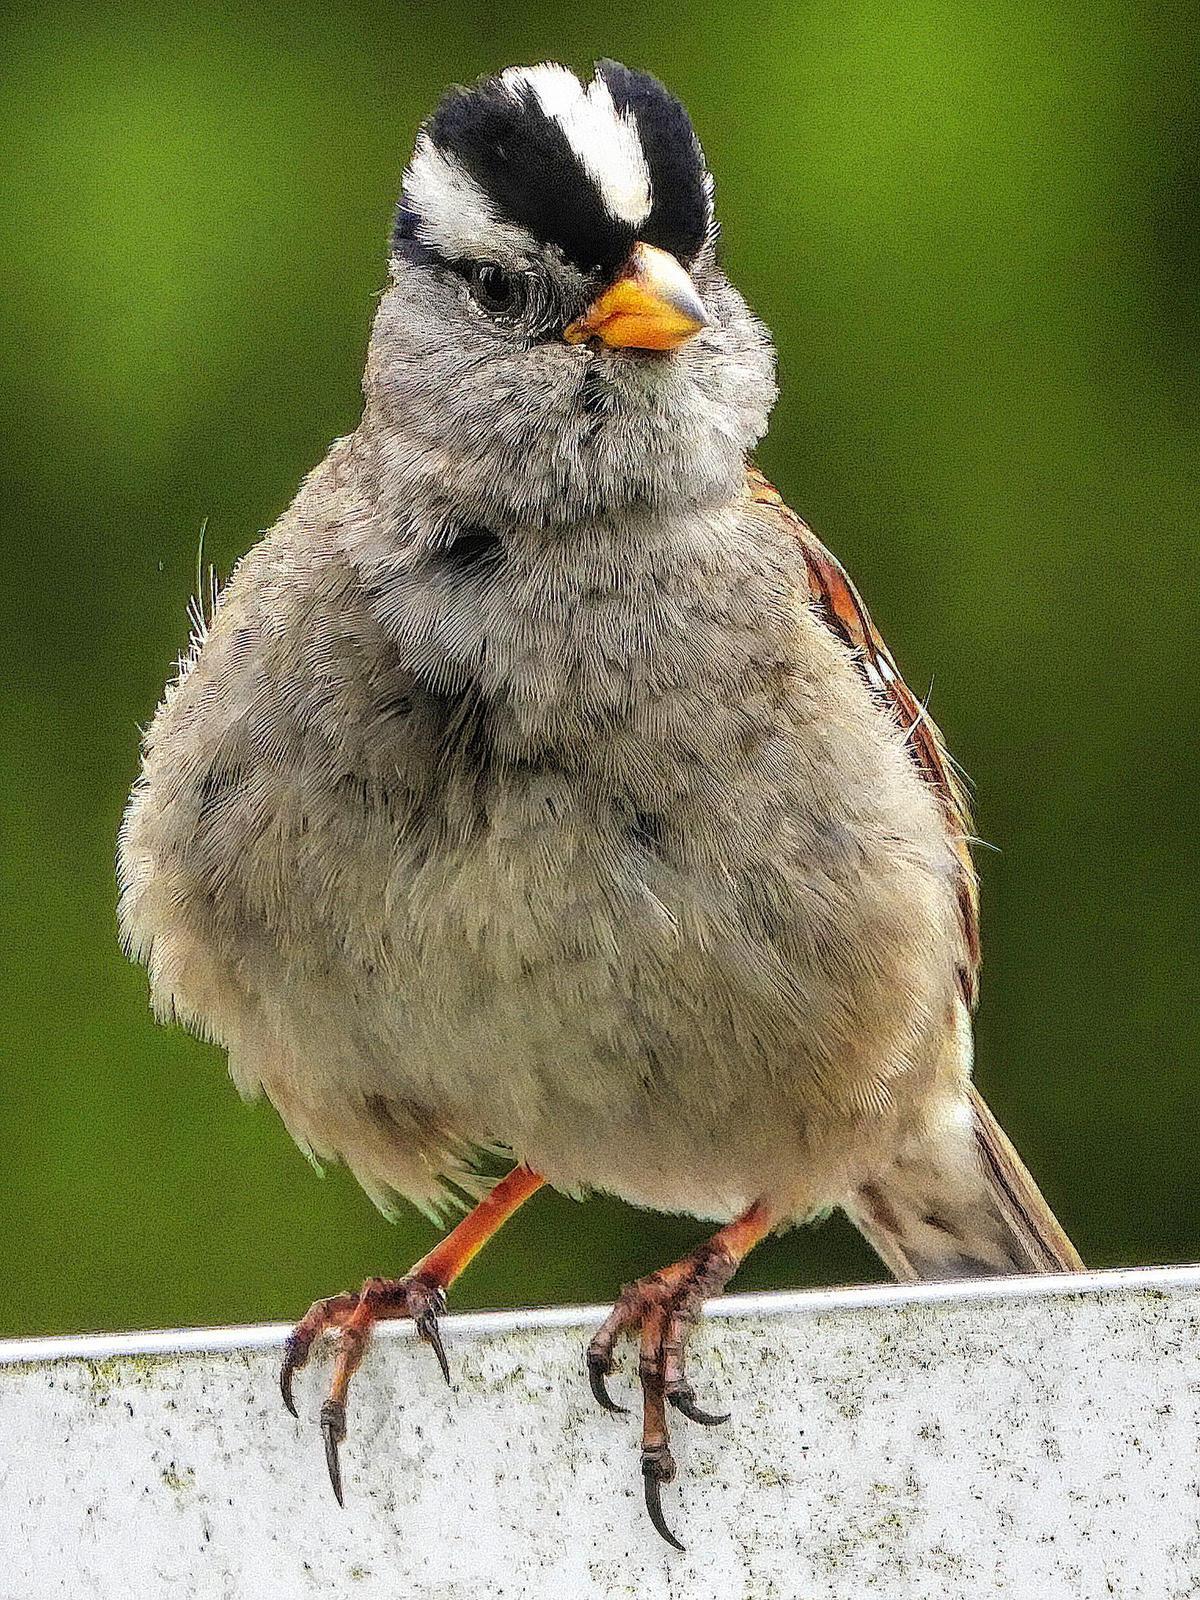 White-crowned Sparrow (pugetensis) Photo by Dan Tallman